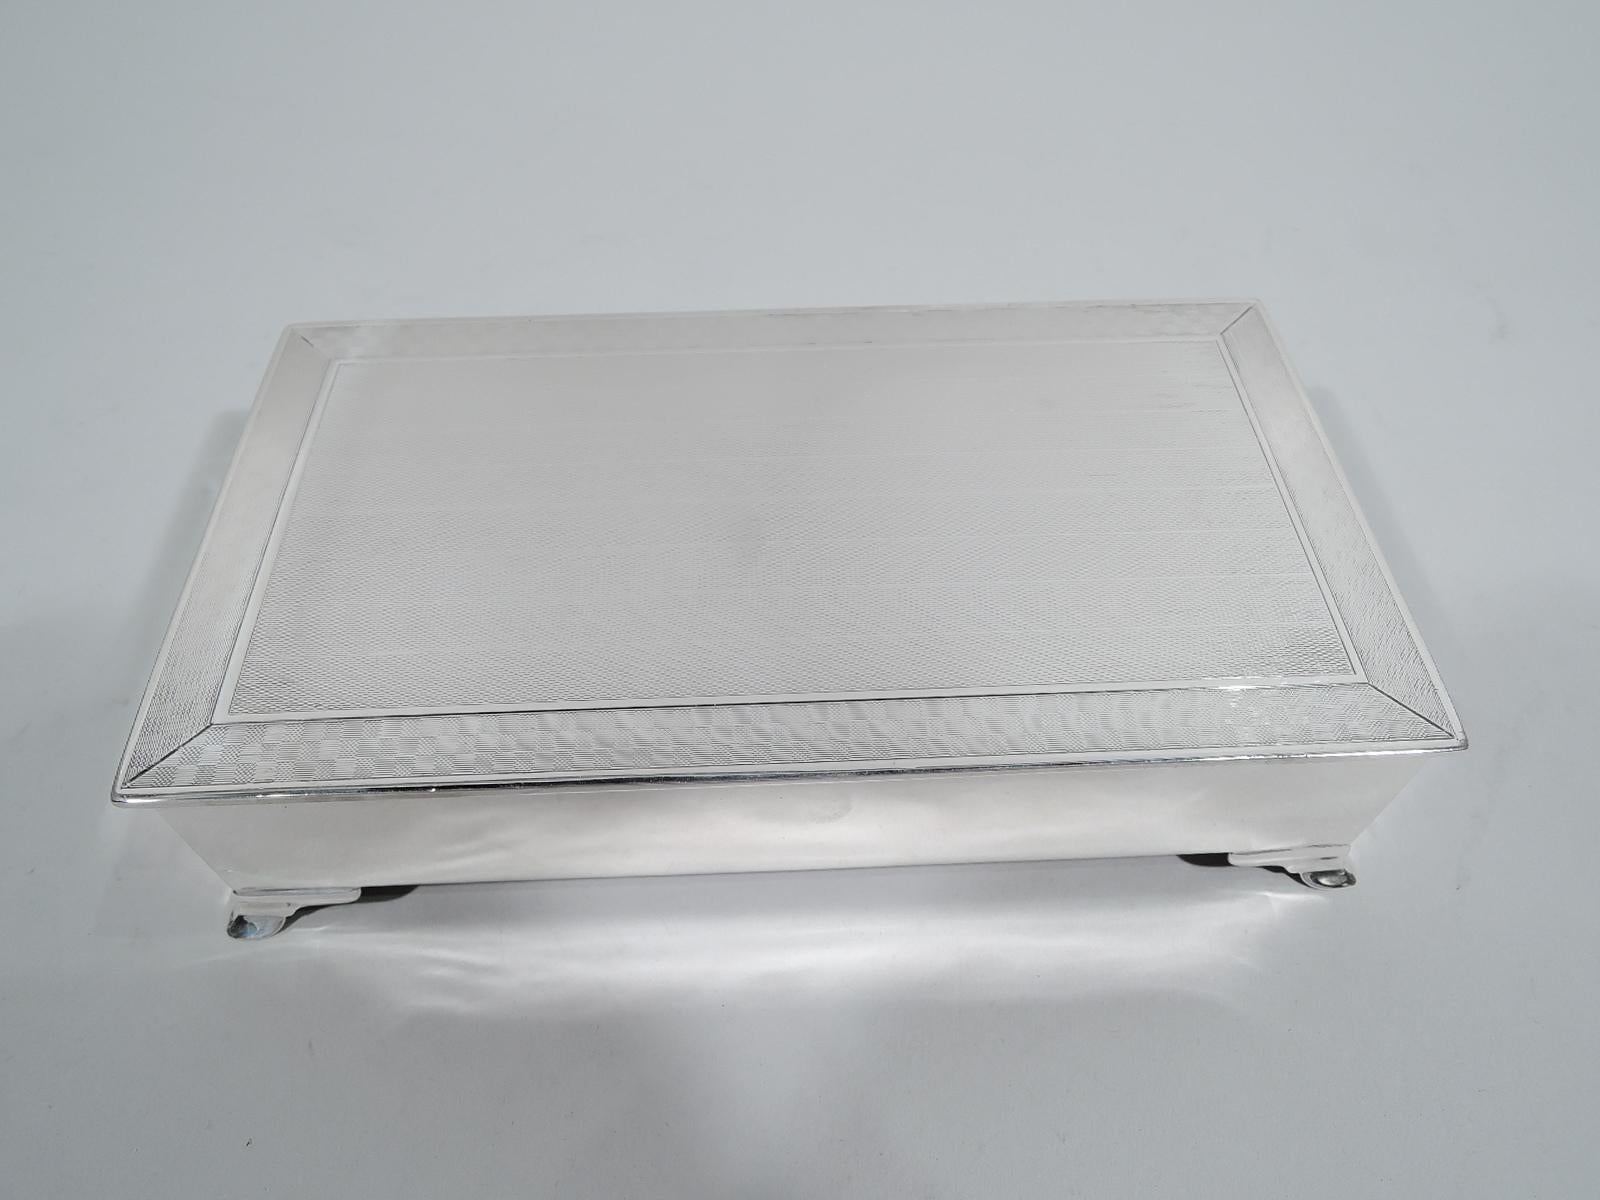 George V sterling silver box. Made by Henry Matthews in Birmingham in 1929. Rectangular with plain and straight sides, and corner bracket supports. Cover flat and hinged with slight overhang. Cover top has horizontal engine-turned wave ornament and